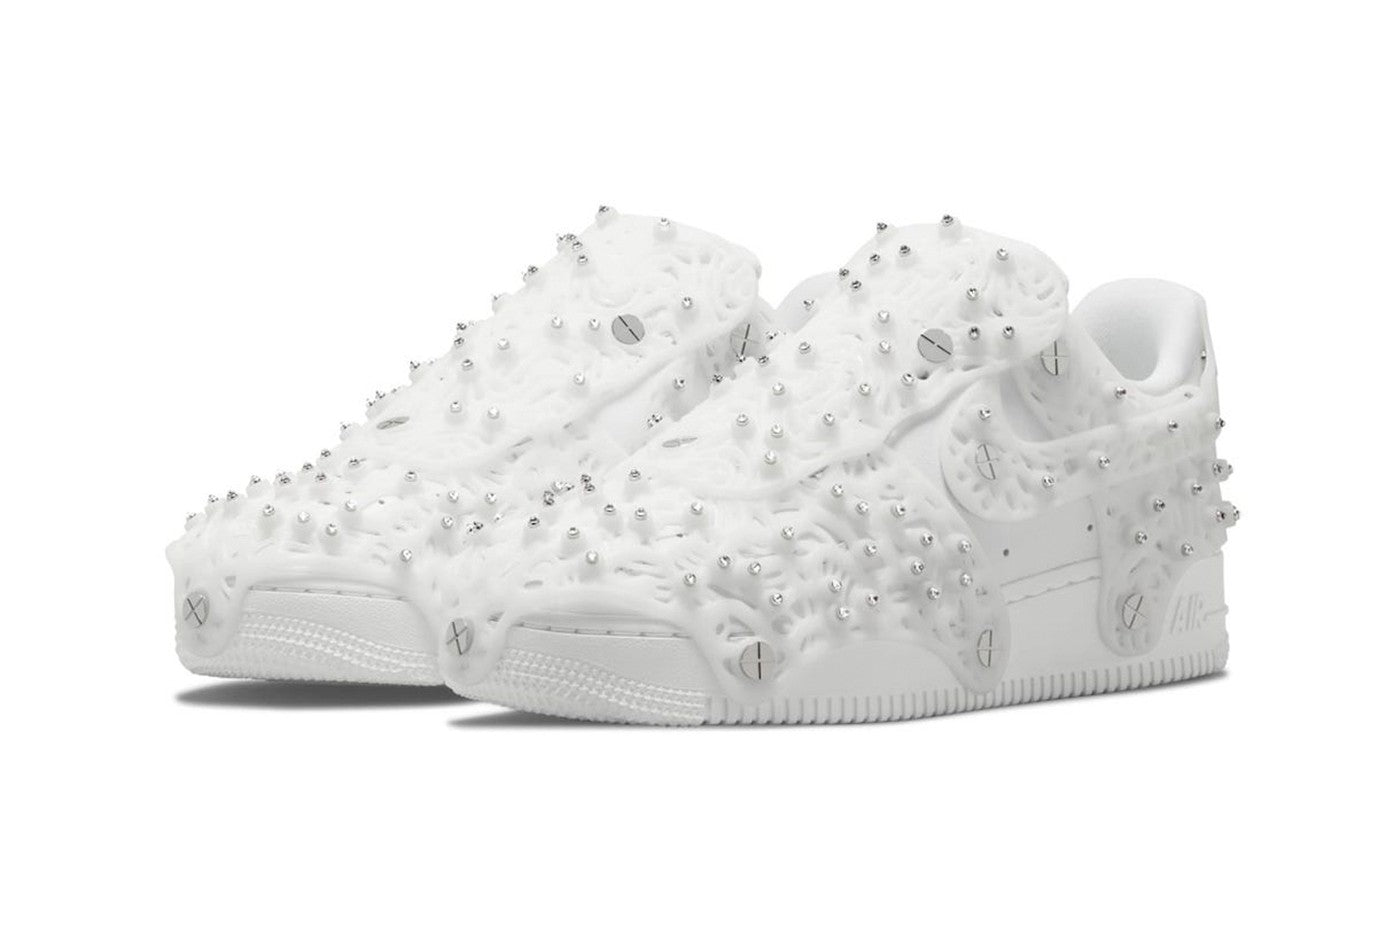 Louis Vuitton Releases New Crystal-Covered Kicks